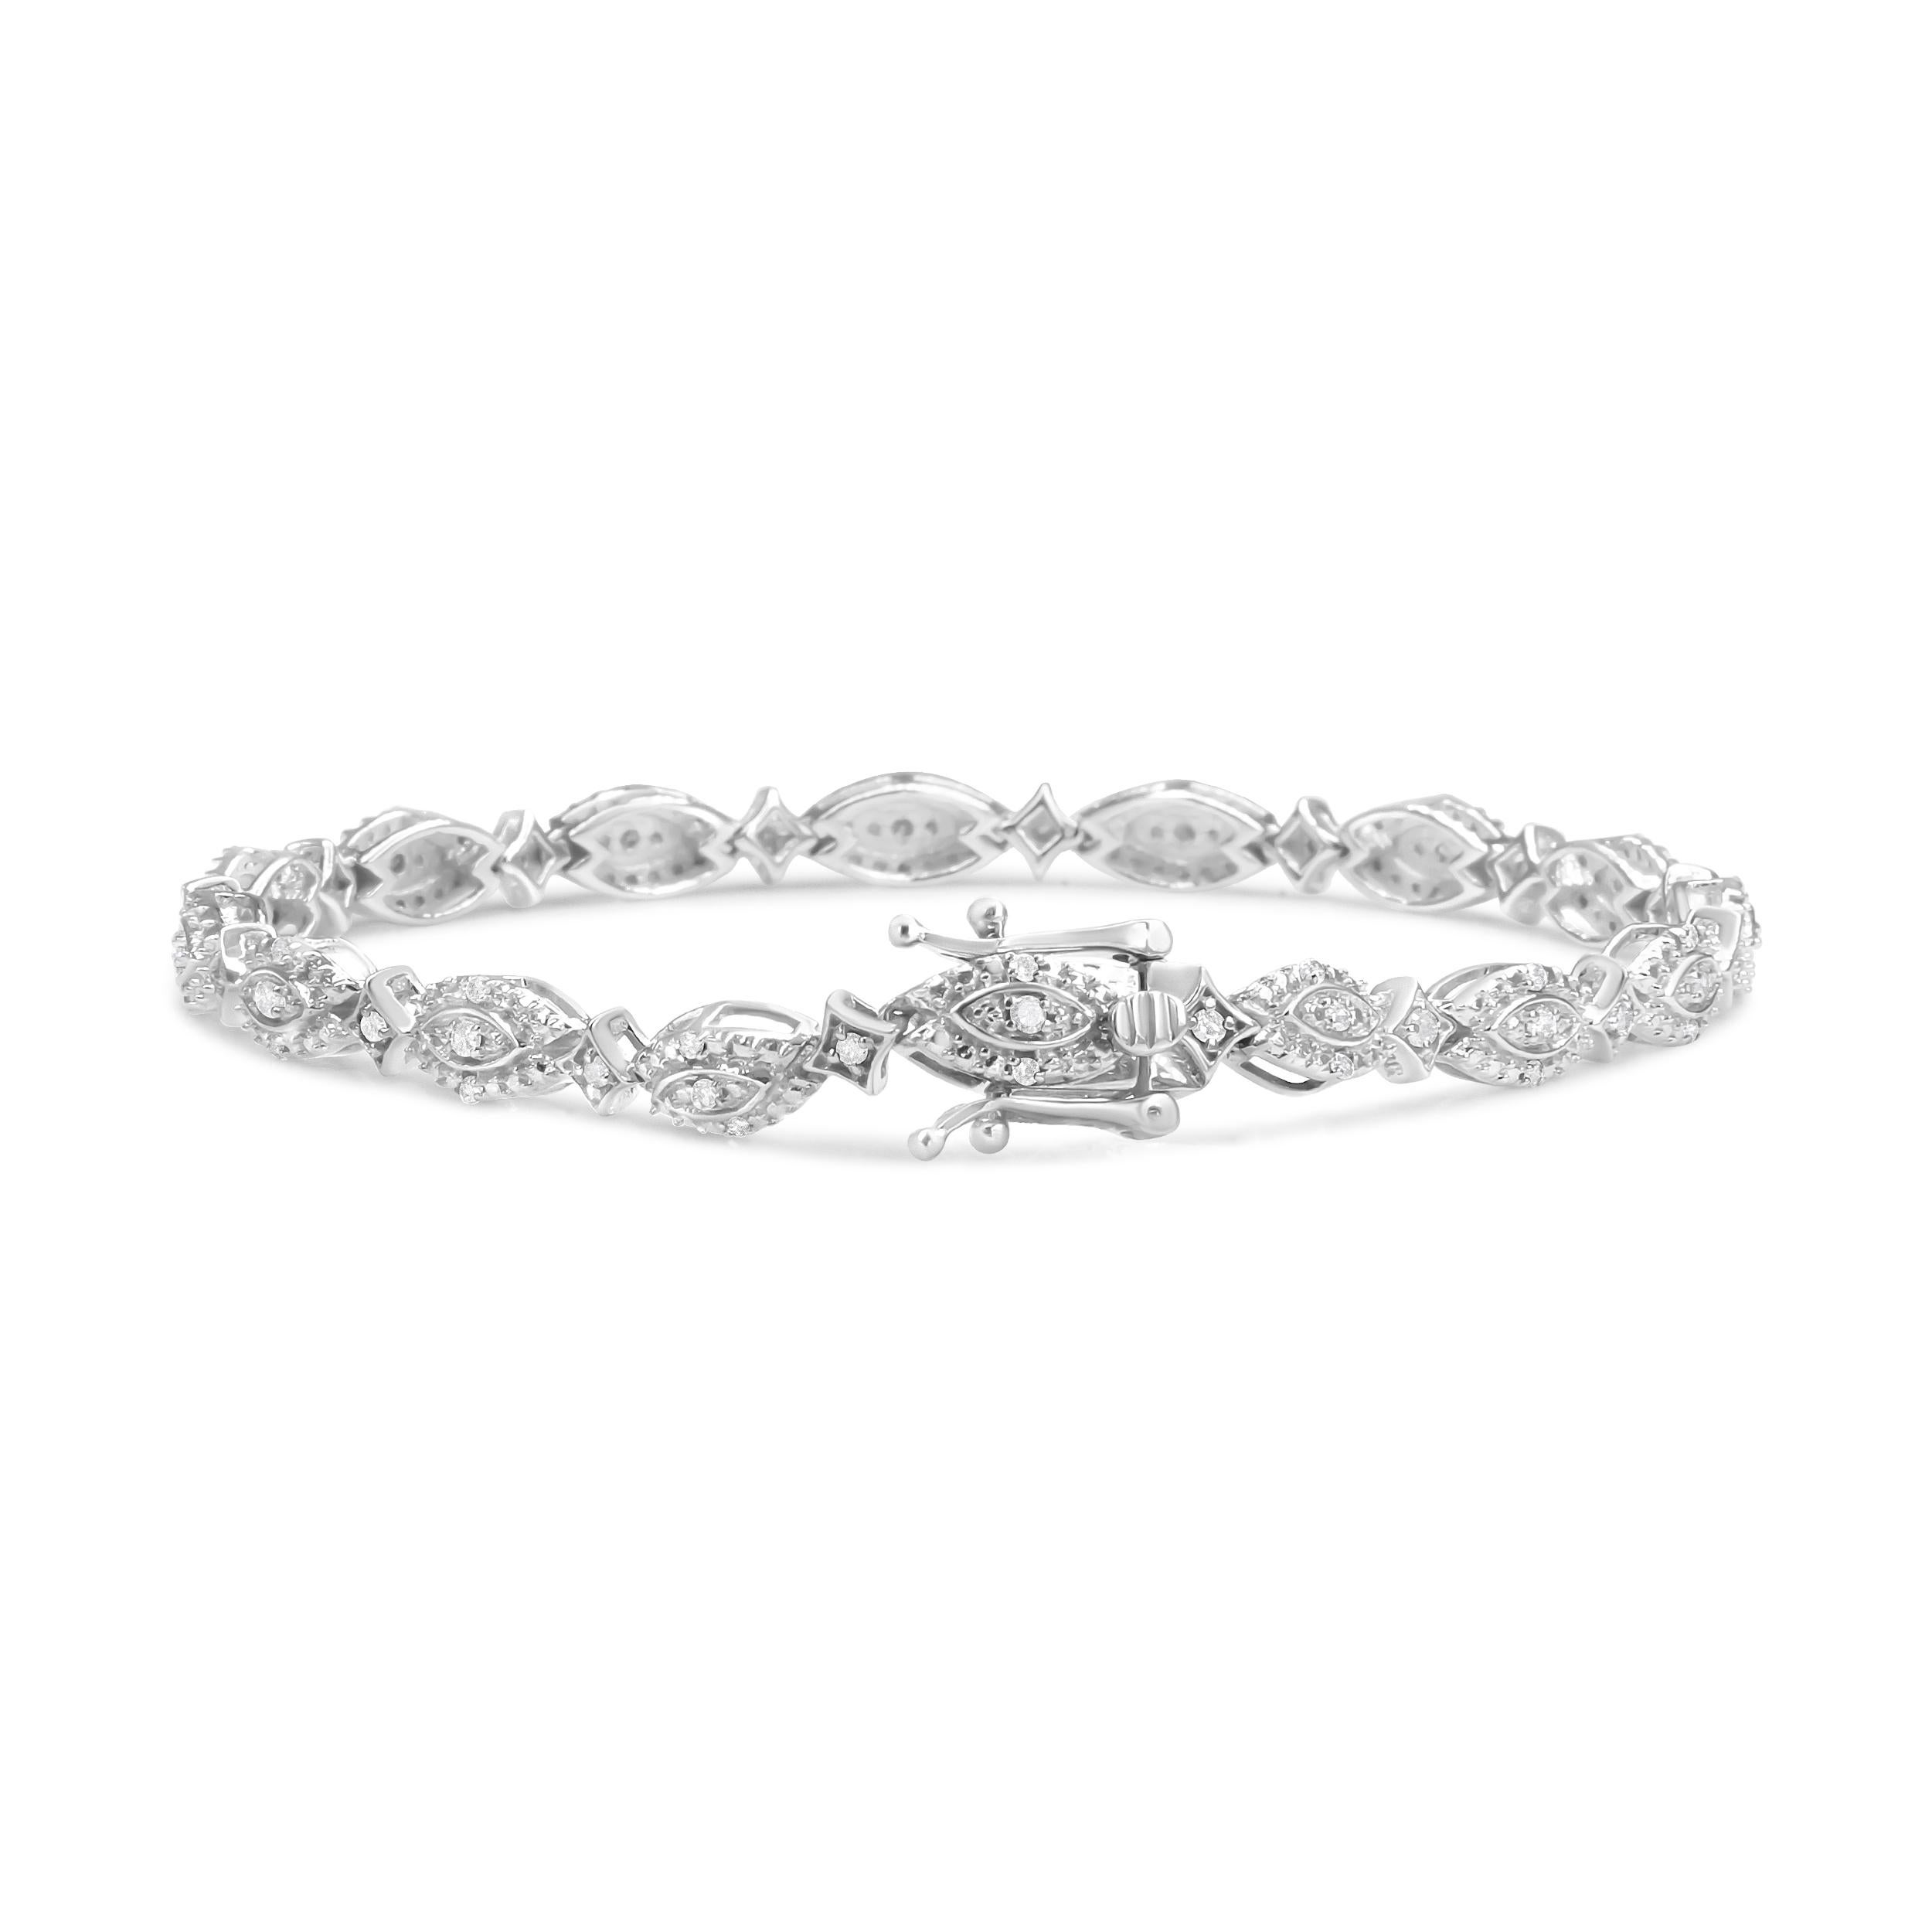 This show-stopping diamond link bracelet  is an enviable accessory detailed with the glamour of round diamonds cradled in prong settings, totaling 1/2 cttw with an approximate I-J Color and I2-I3 Clarity. Alternating marquis and starburst shaped